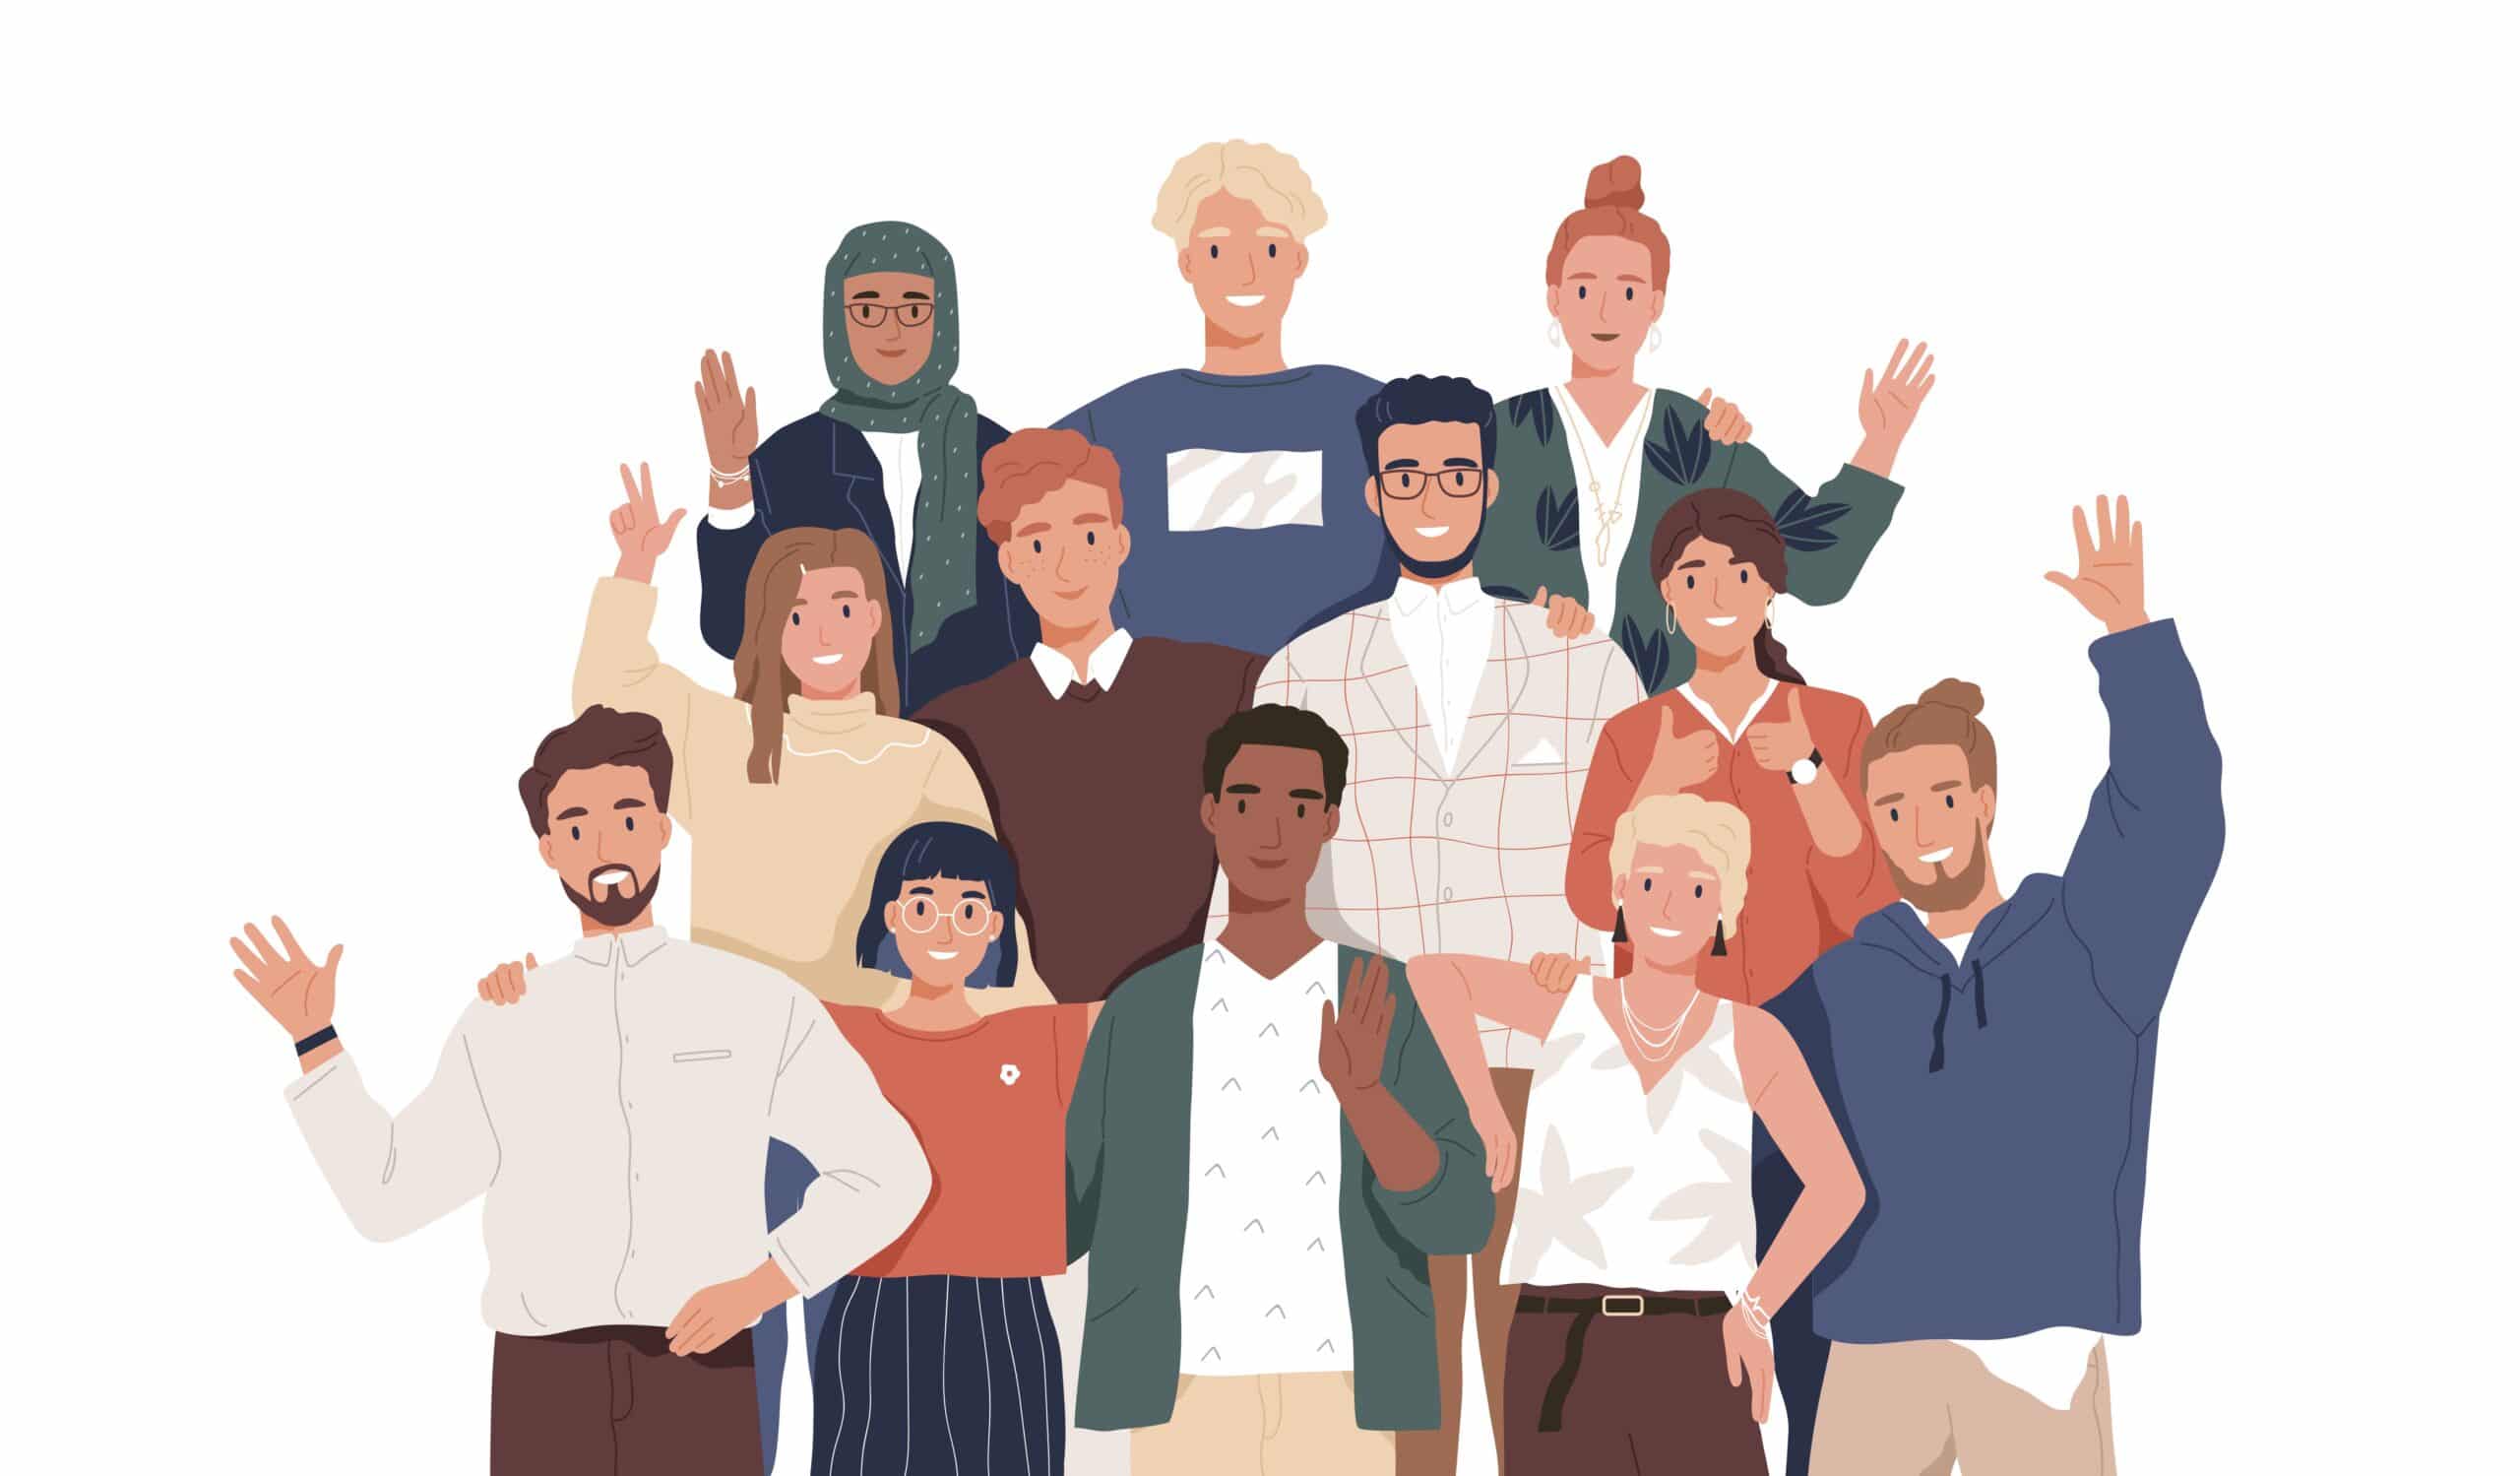 Illustration of group of people who are smiling and waving.